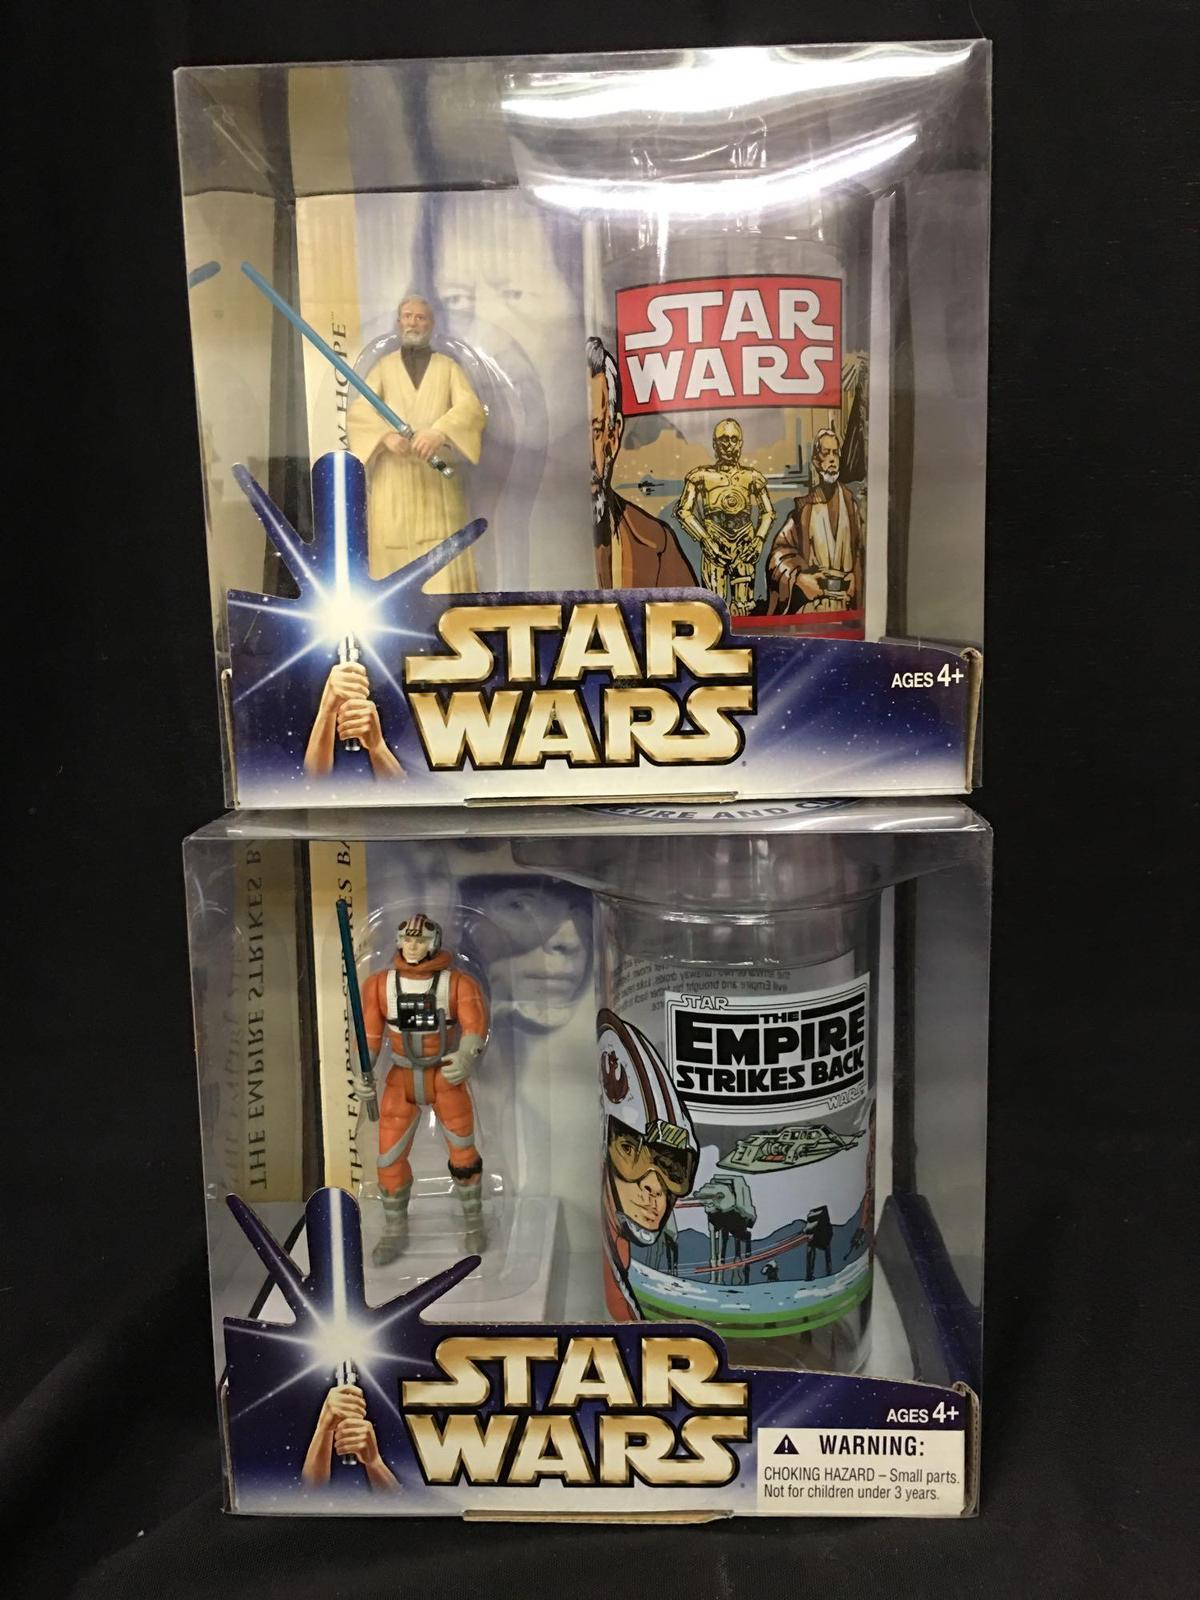 Star Wars Figure and Cup